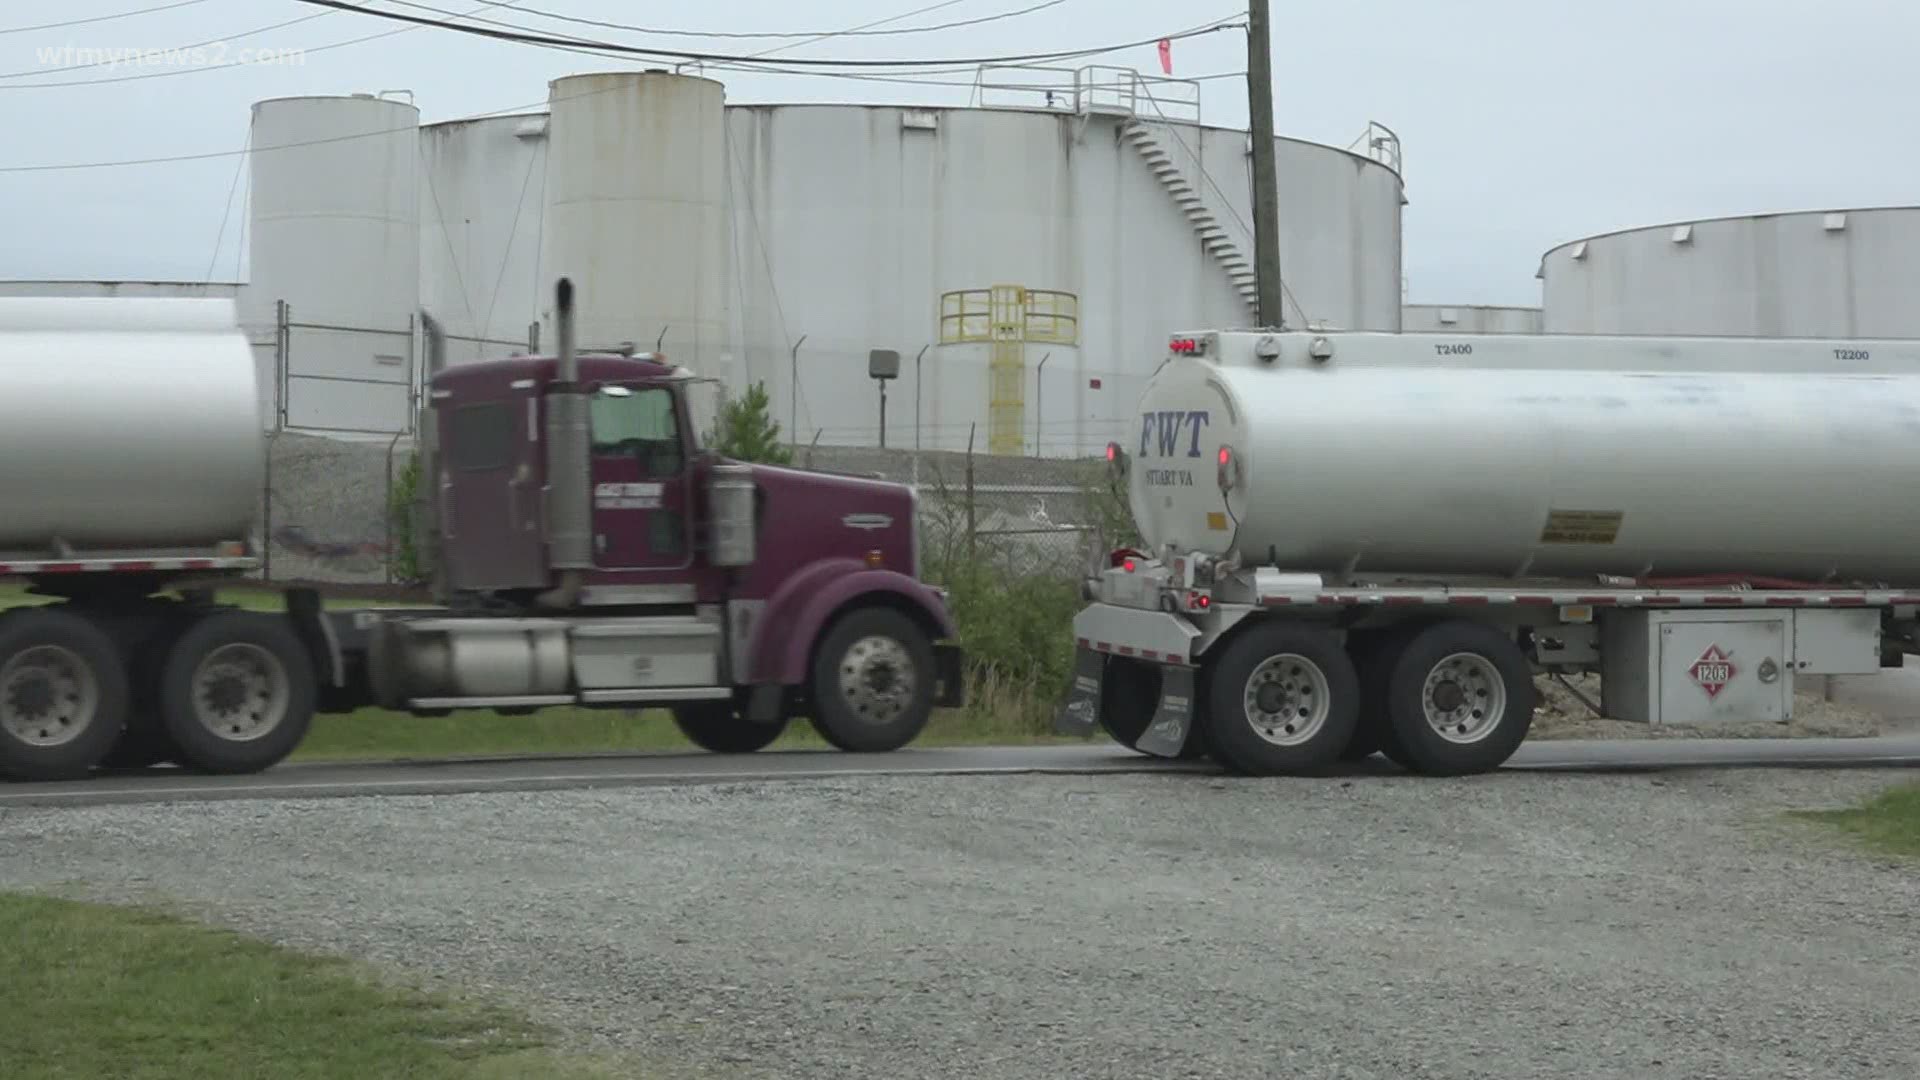 Fuel truck drivers are trying to meet the demand as supply is low, but they need to fill up on gas too.